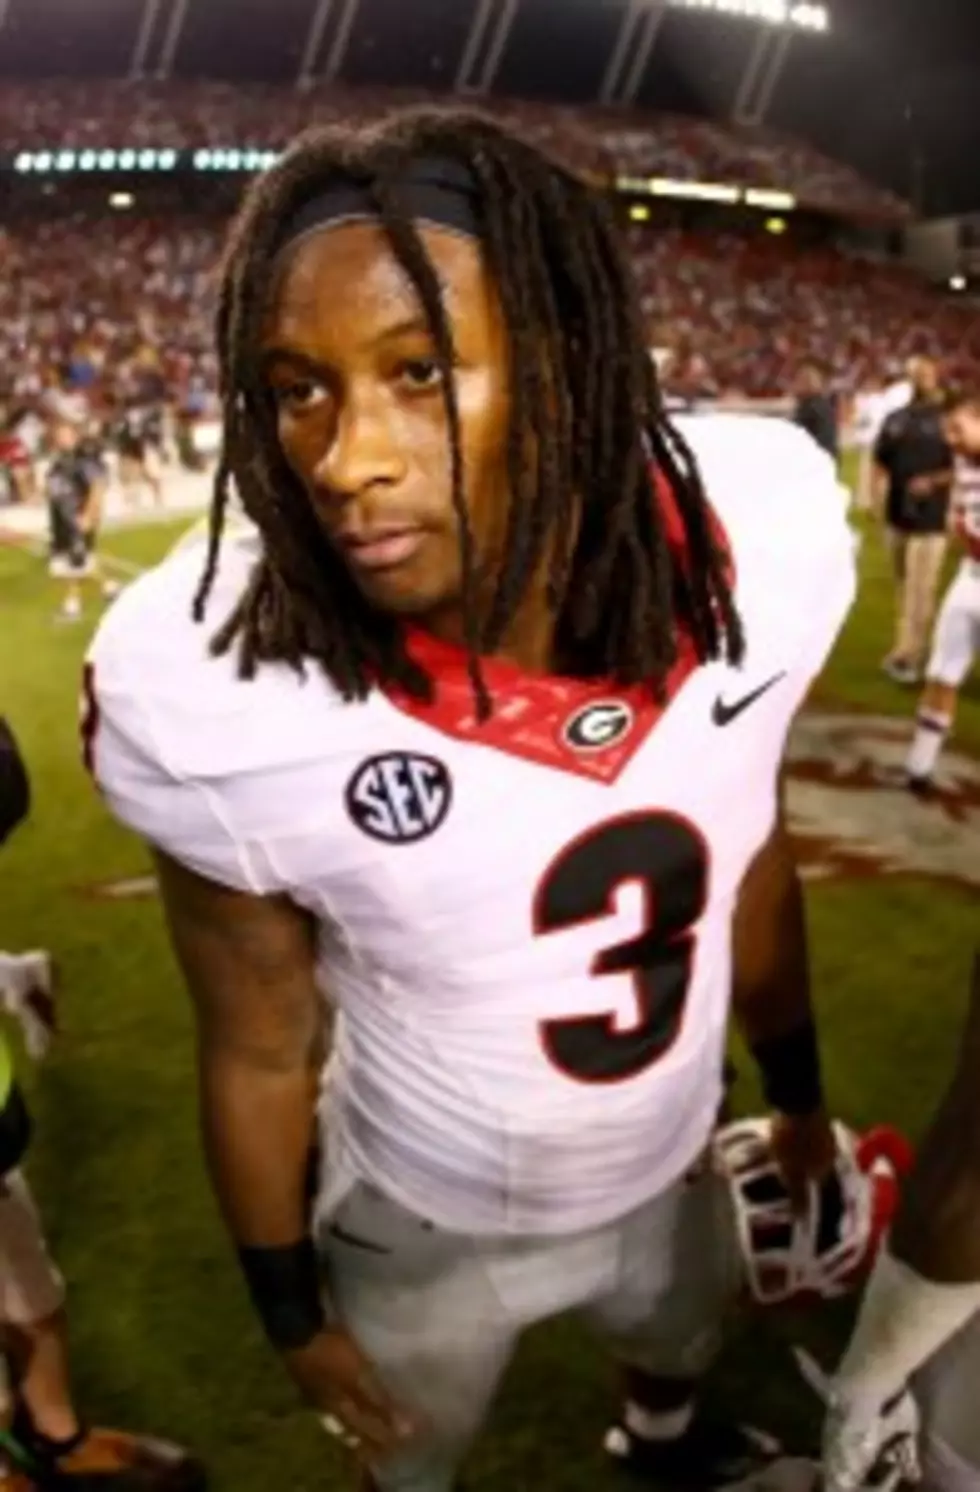 Todd Gurley Not Expected to Play for Georgia This Week